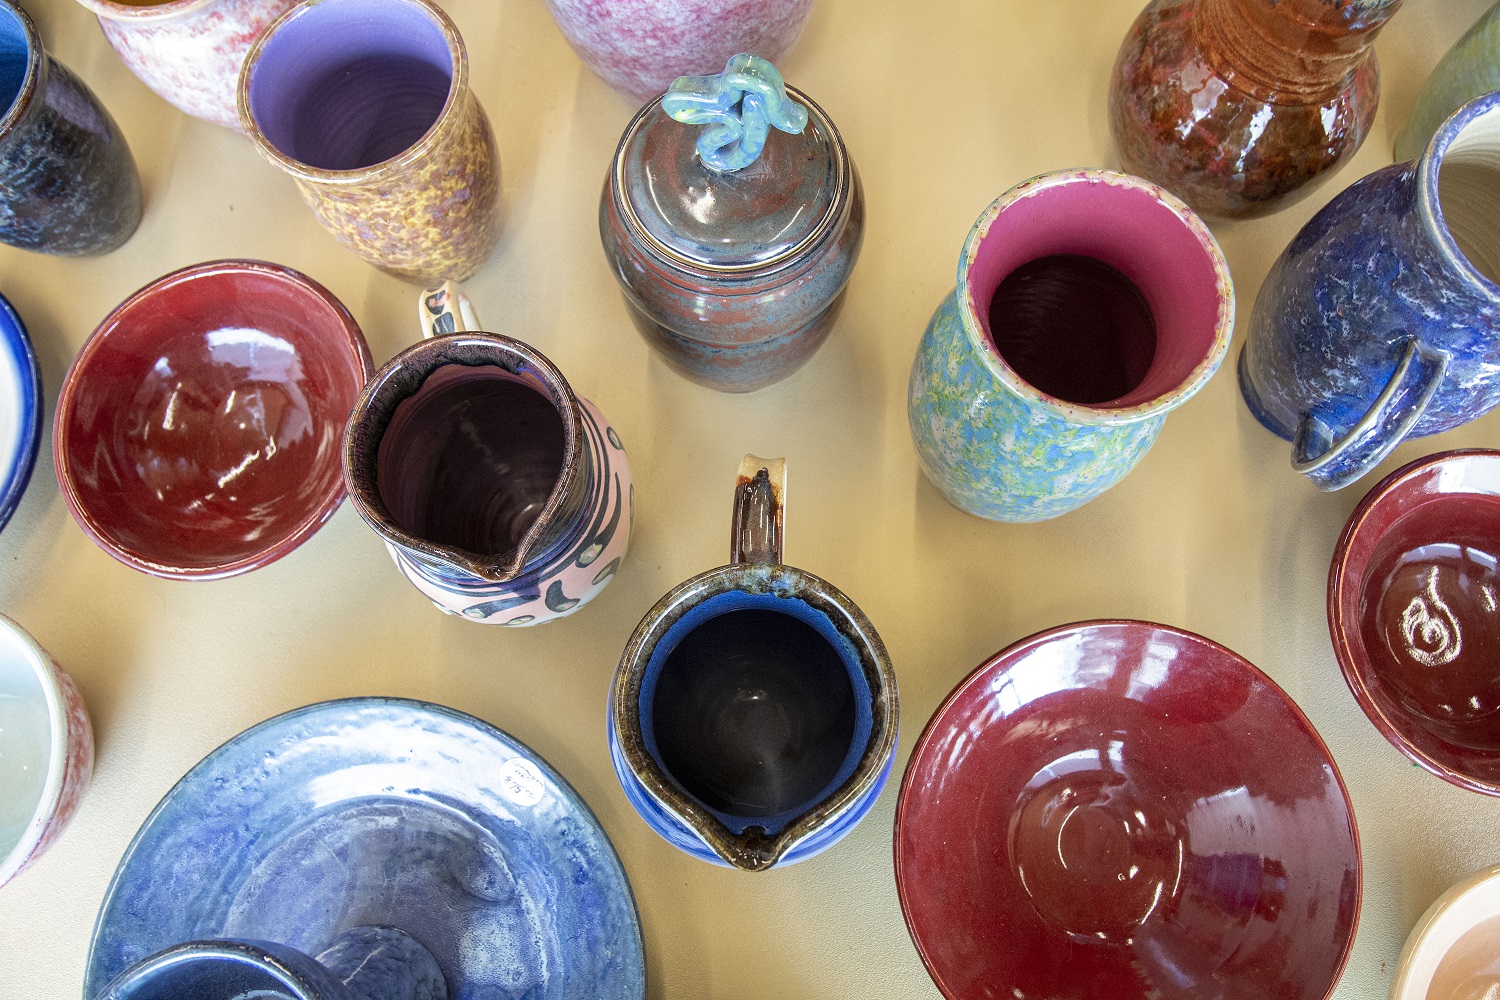 a photo of colorful pottery taken from above with a view inside the cups and mugs